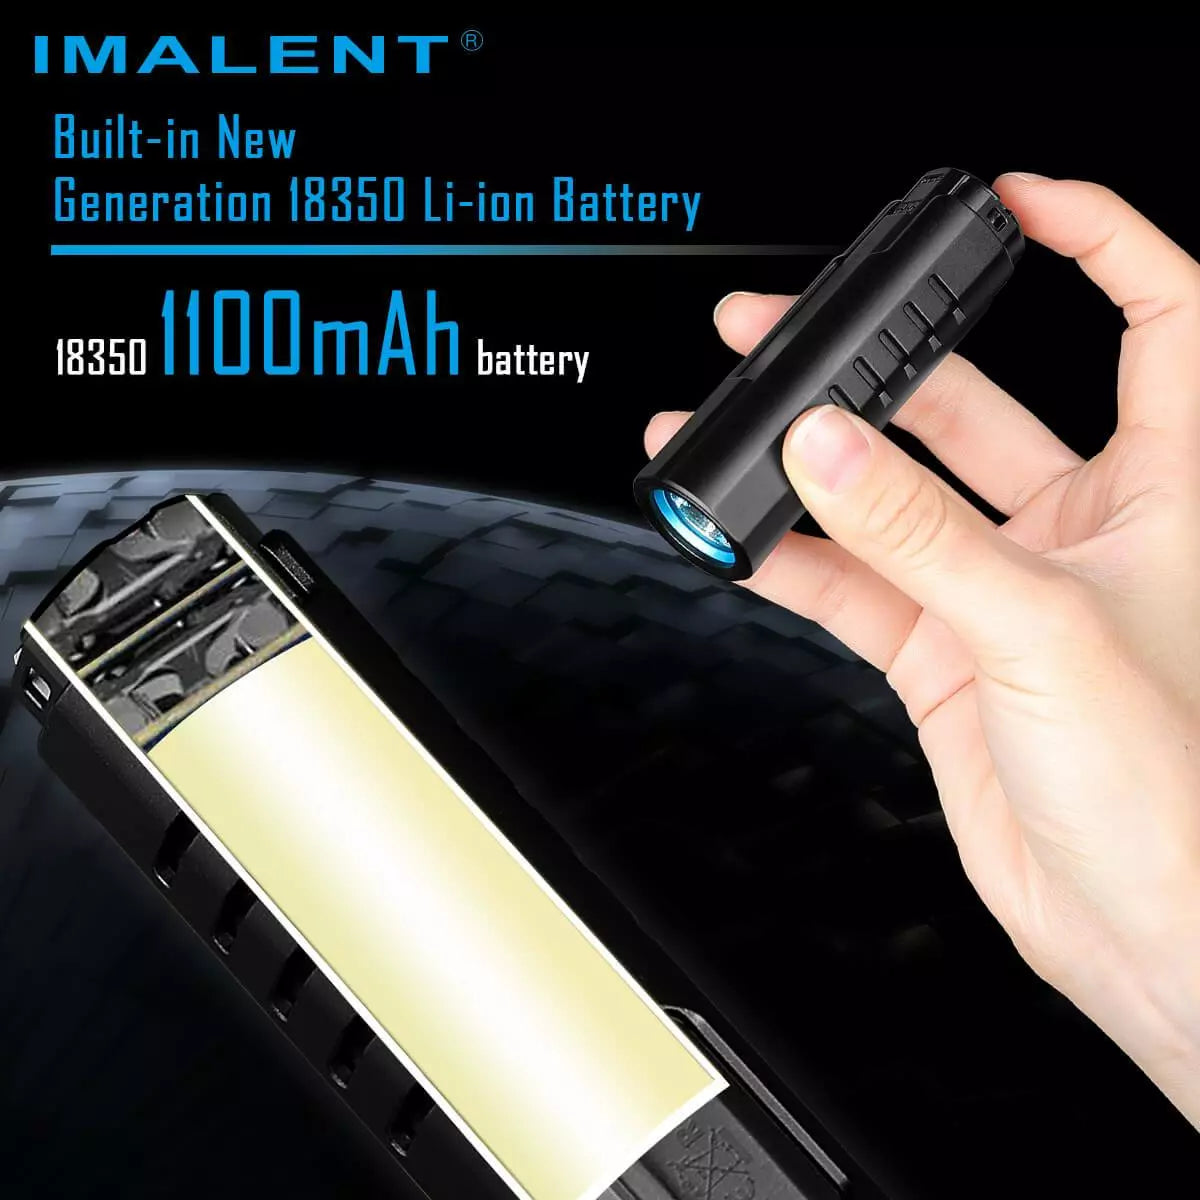 Imalent LD70 4000 Lumen Compact Rechargeable Torch - Blue